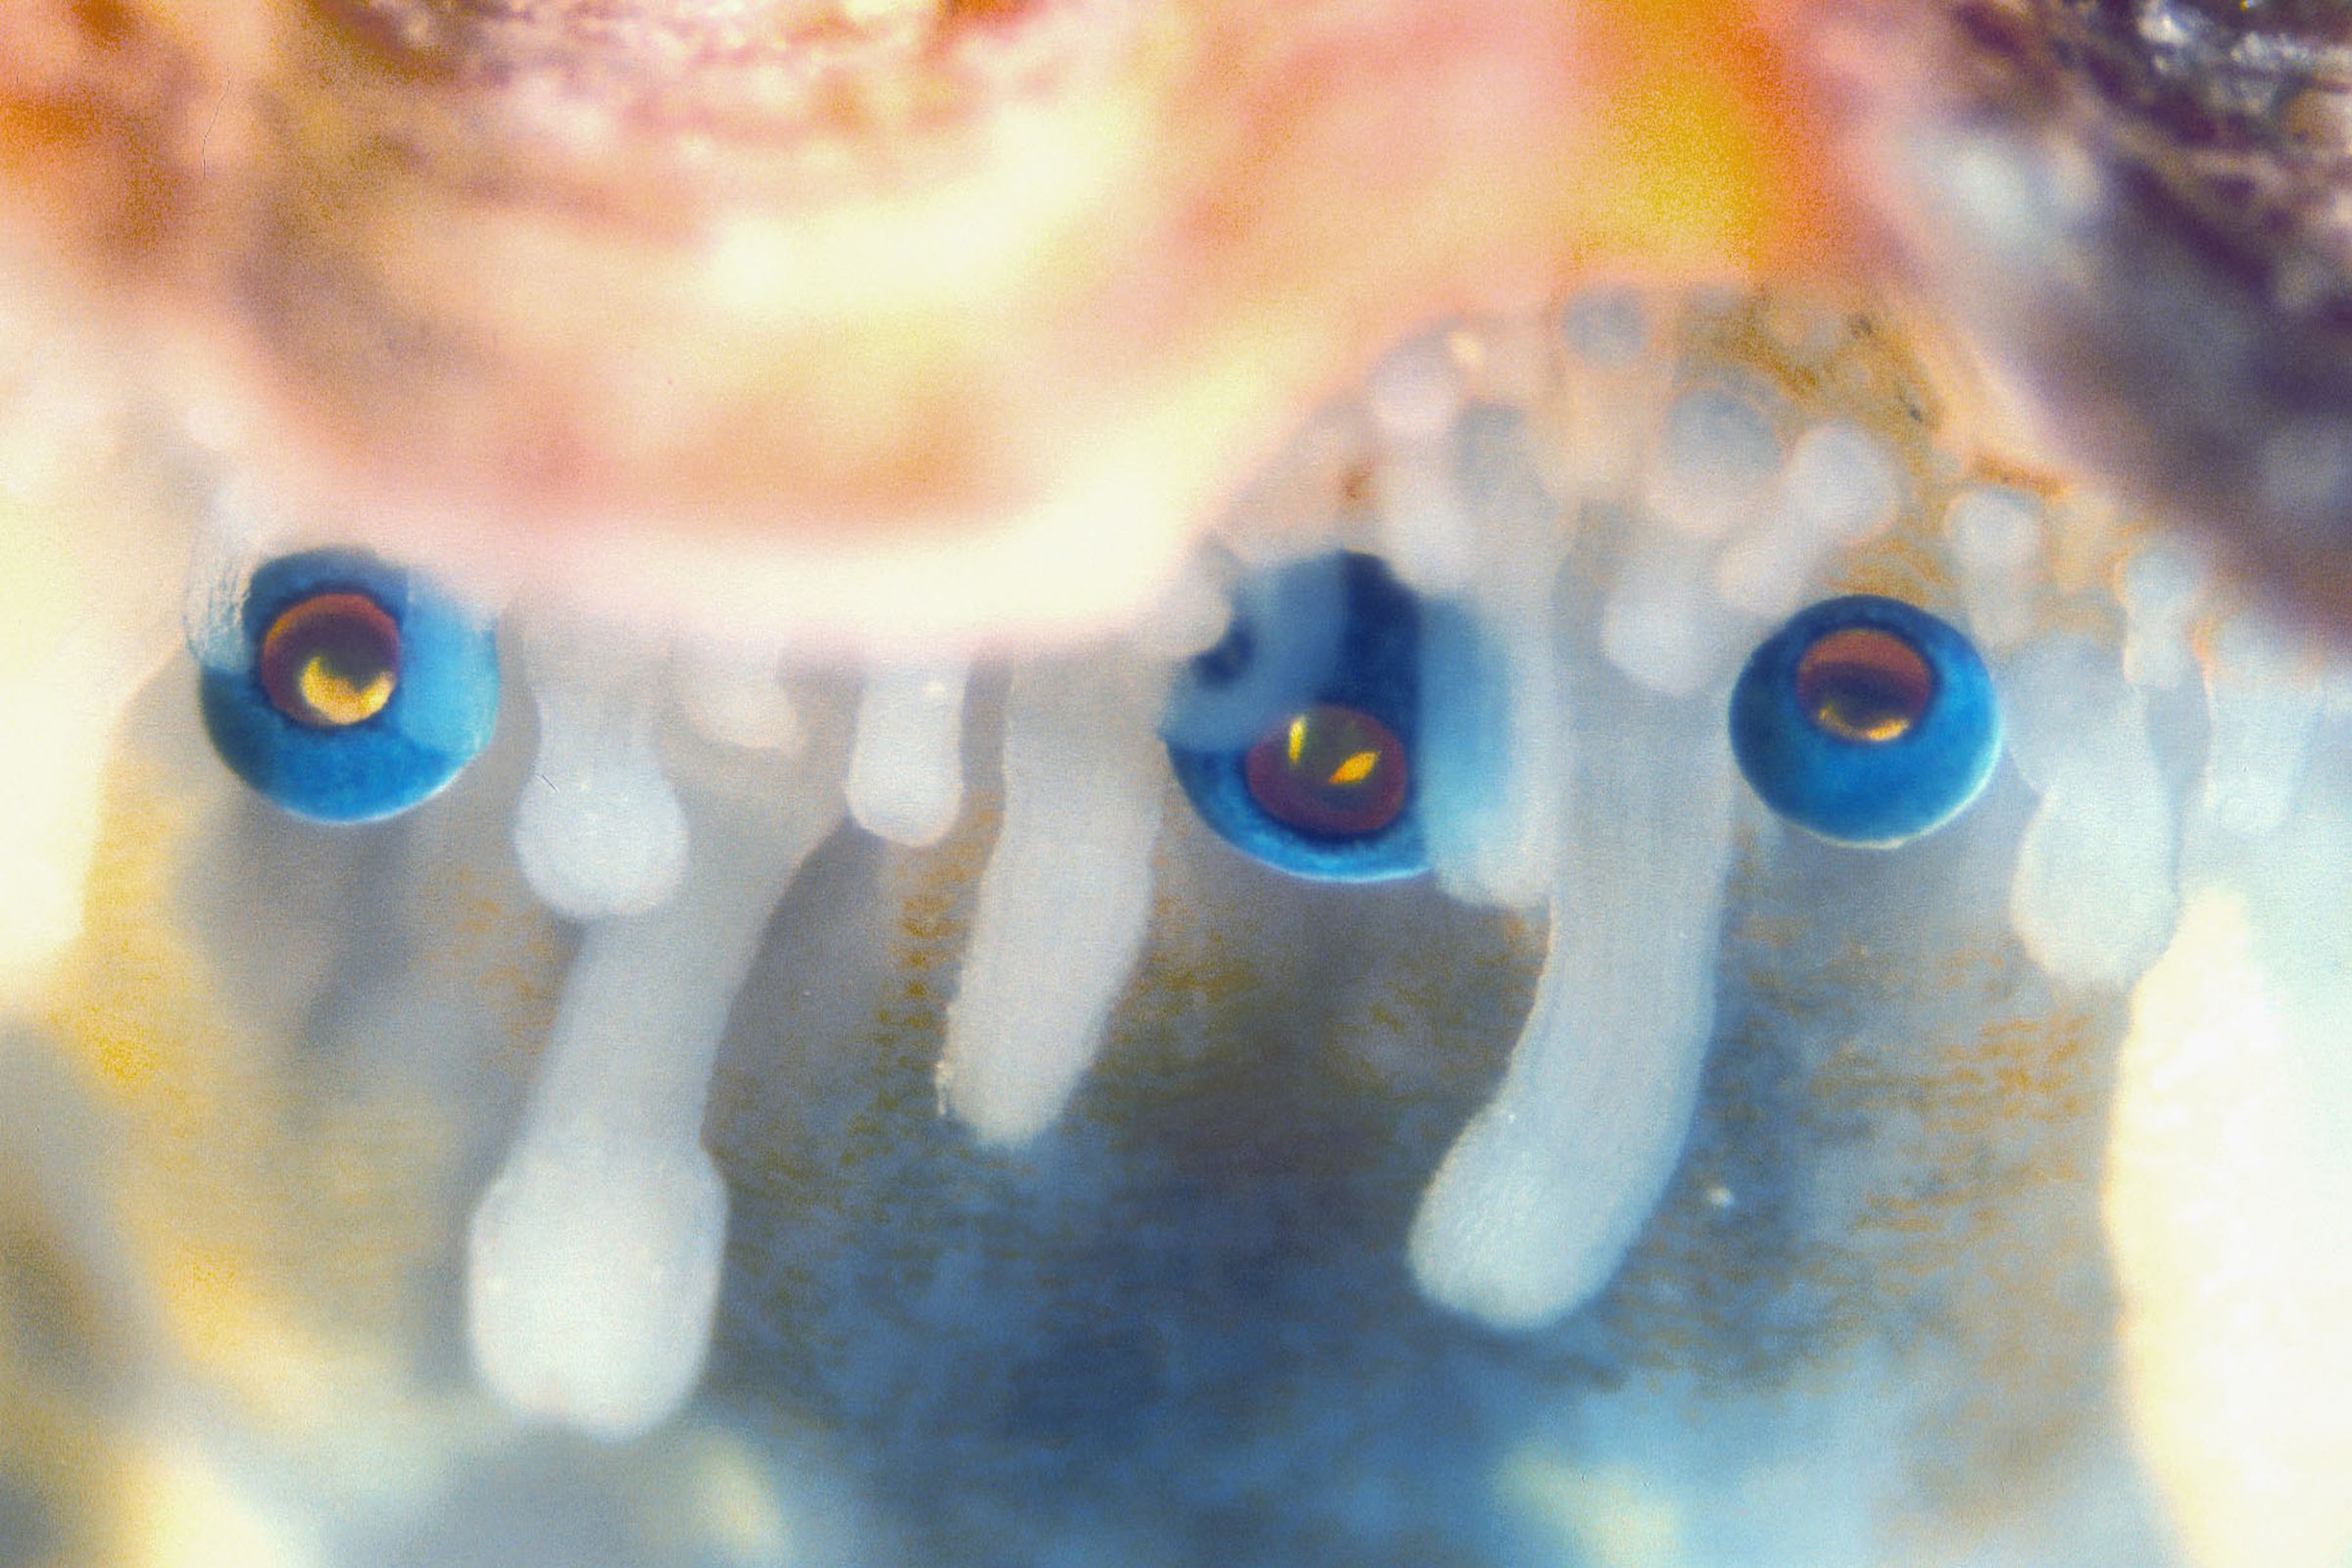 Three eyes of the king scallop.